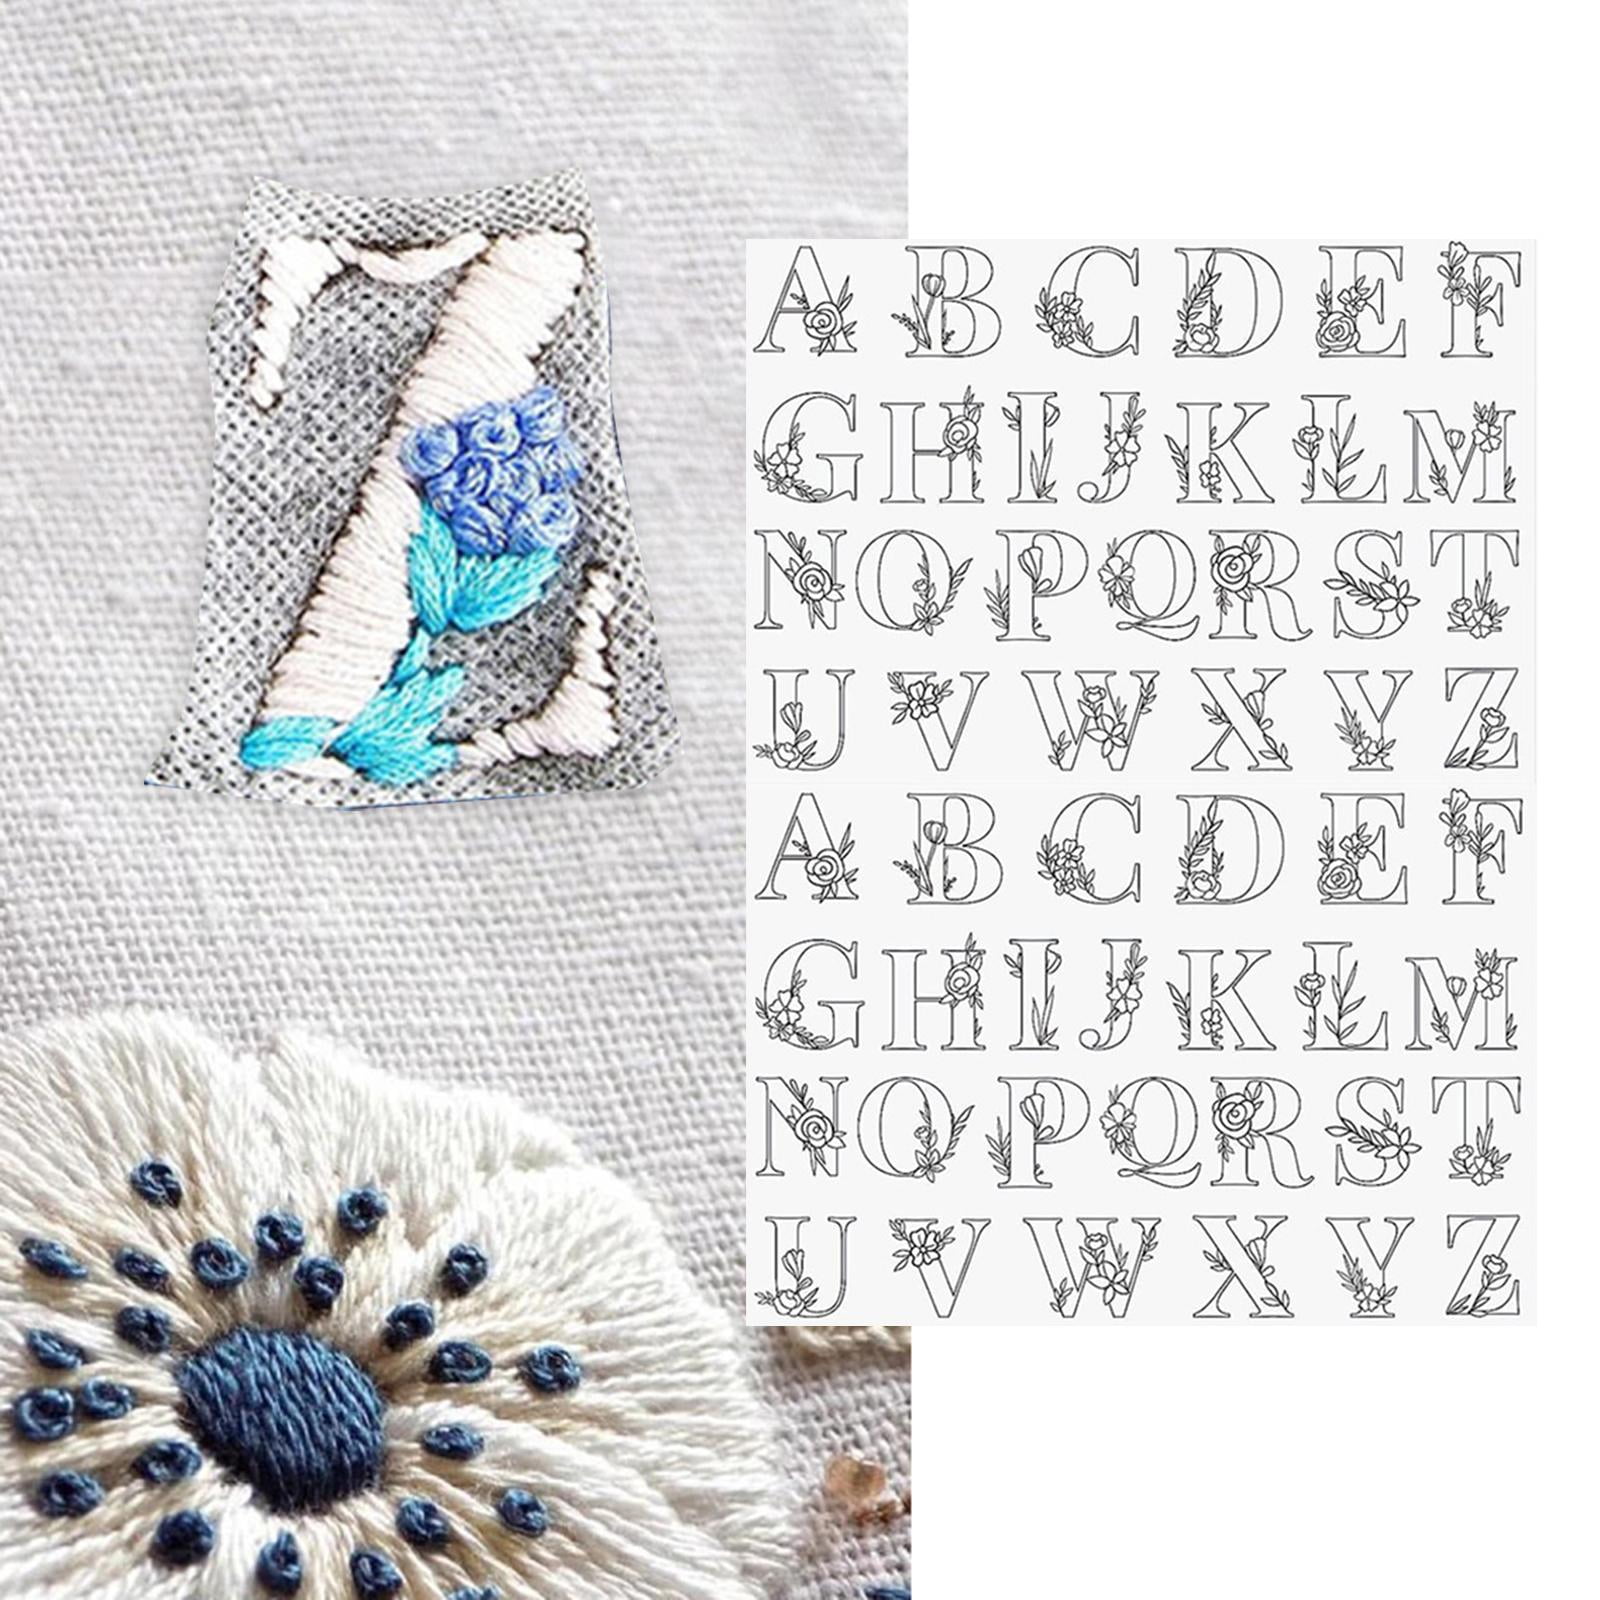  72 Pcs Water Soluble Embroidery Patterns Stabilizers, Stick and  Stitch Embroidery Transfers Paper with Floral Letter Number Patterns for  Embroidery Hand Sewing Lover Beginners